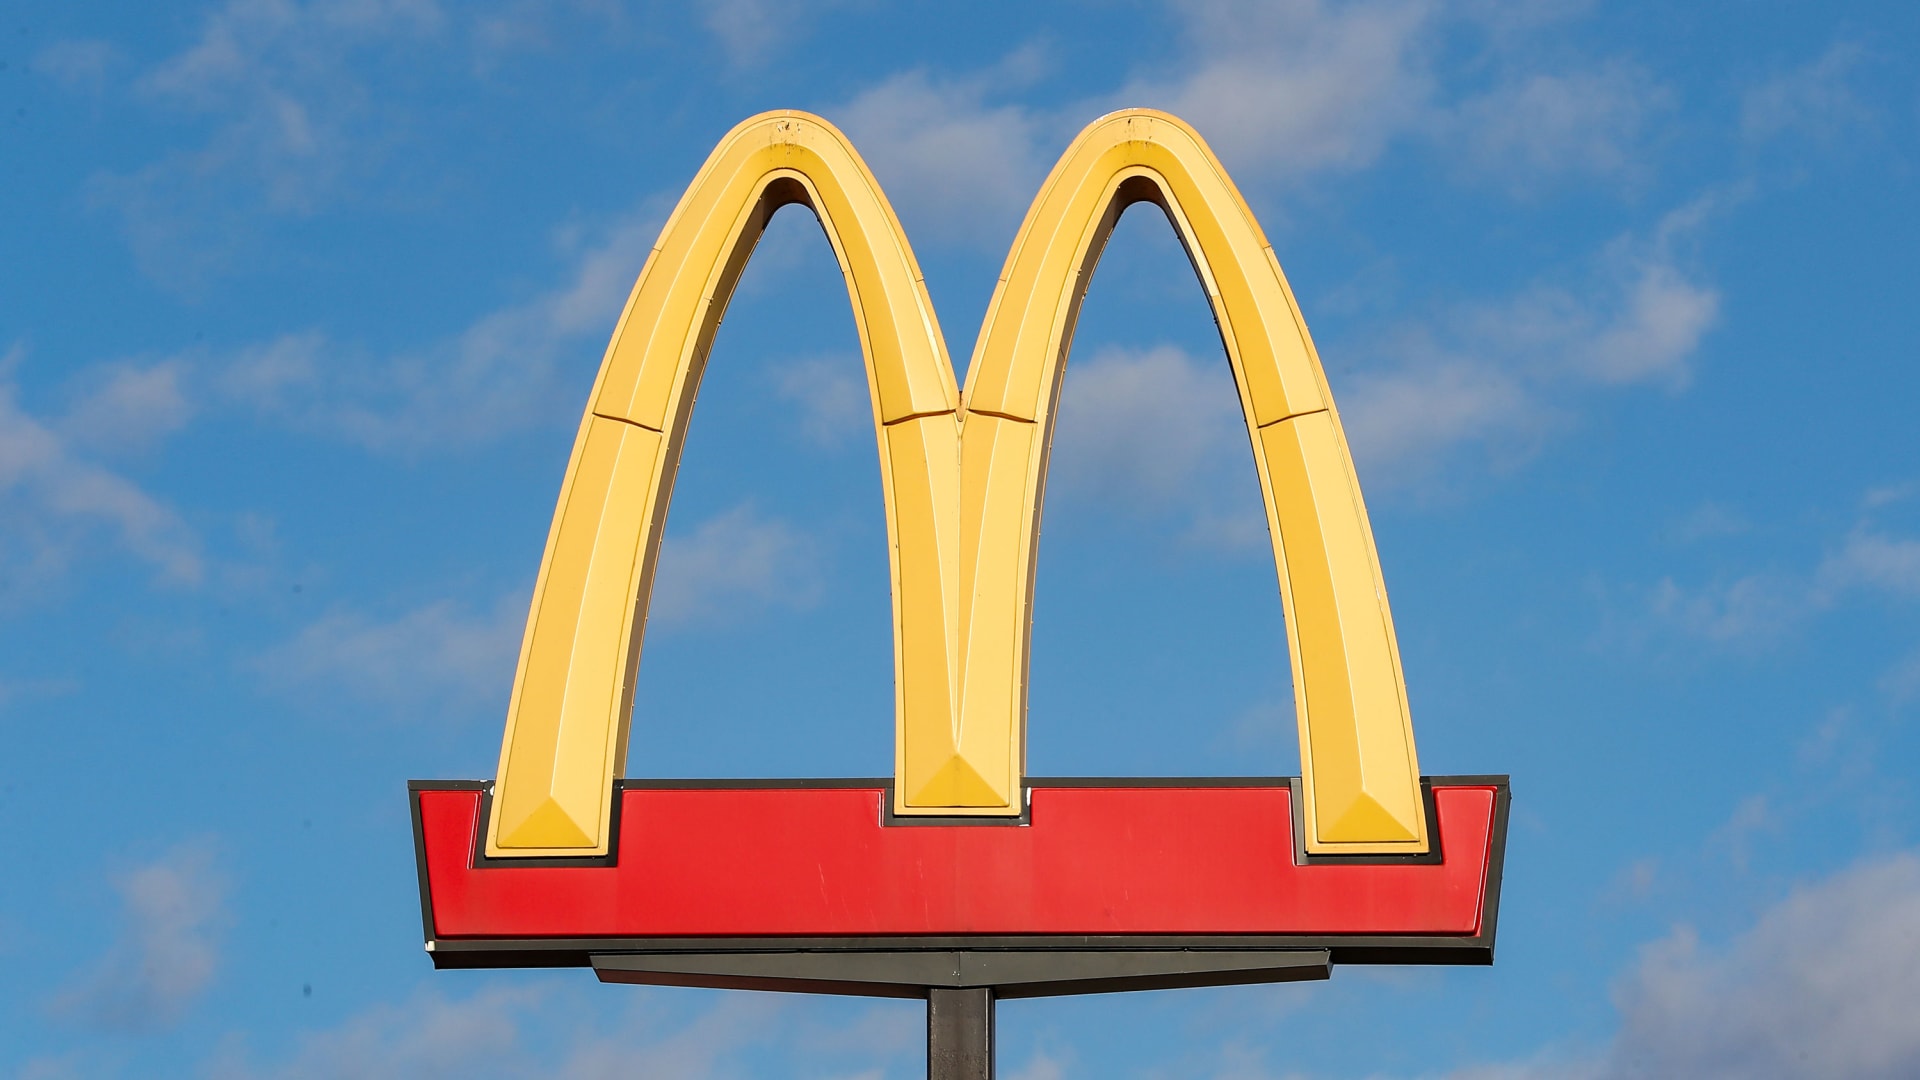 How Emotionally Intelligent Leaders Use the McDonald's Paycheck Rule to Calm Anxiety and Inspire True Loyalty